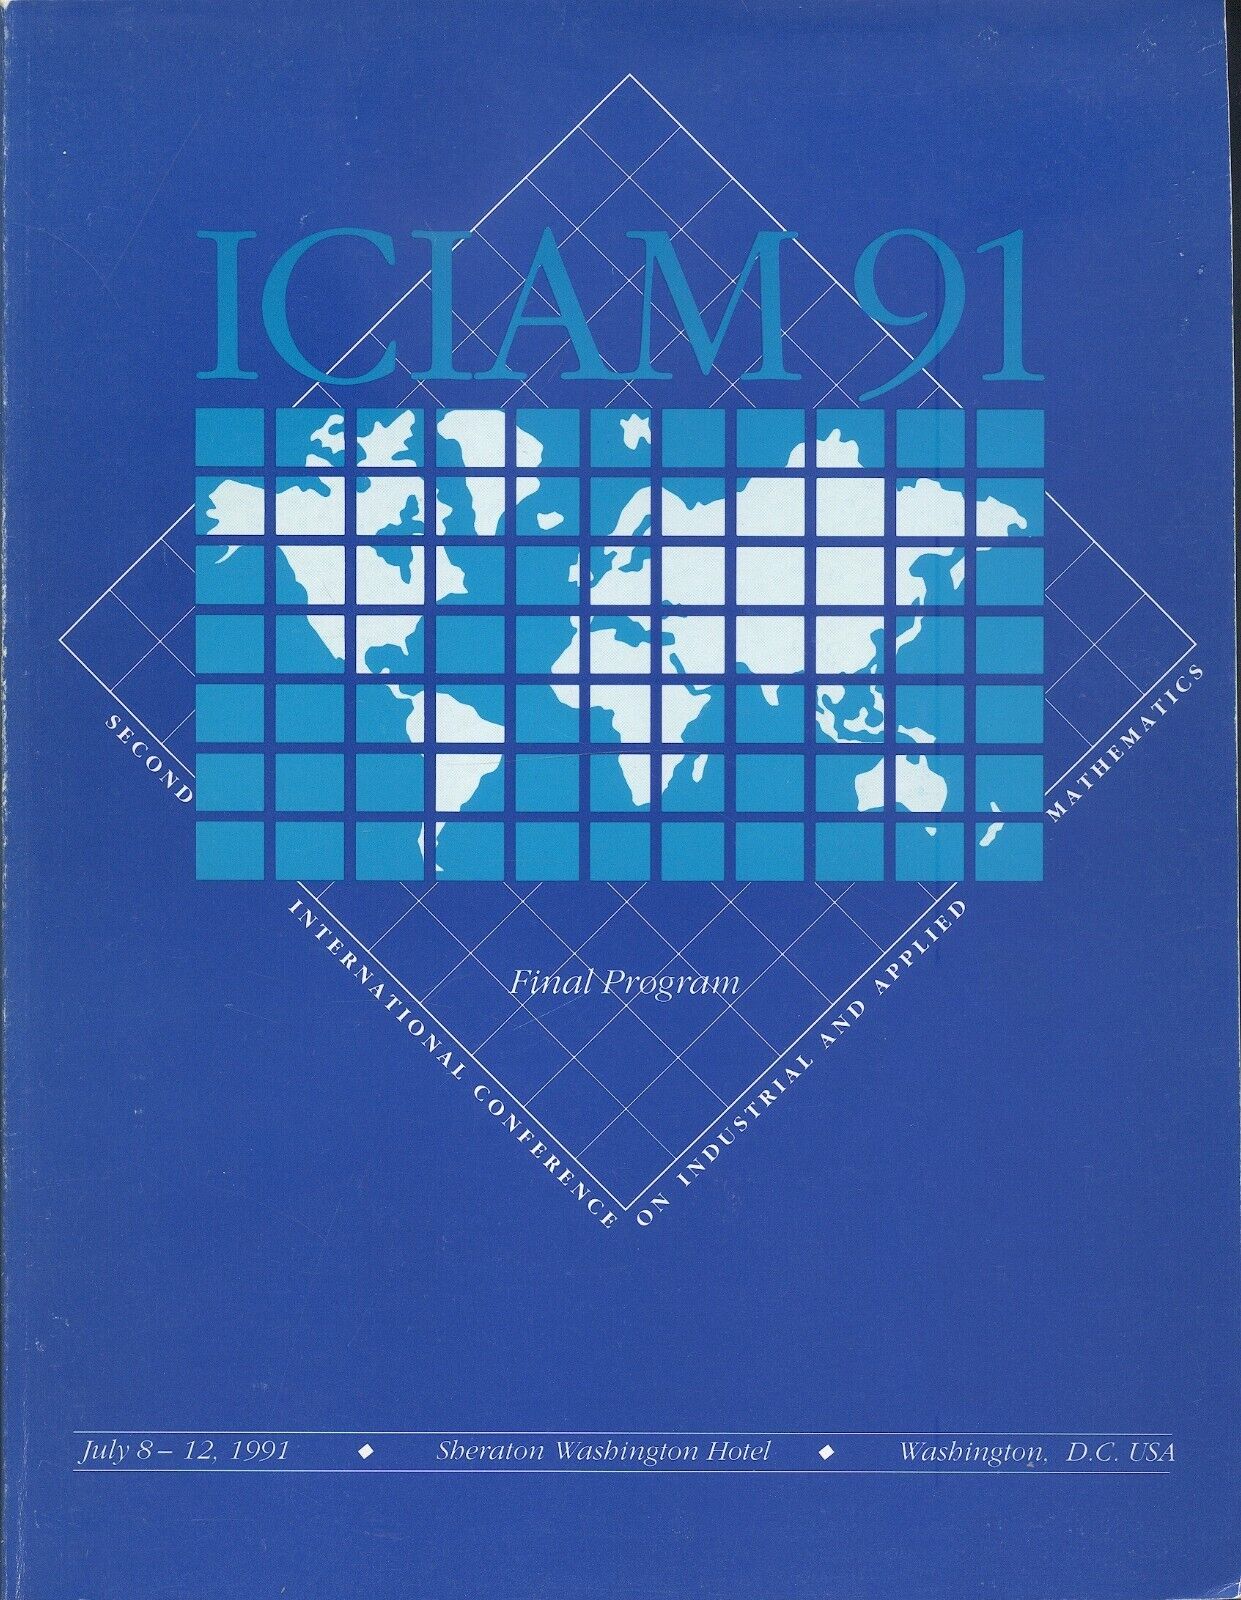 ICIAM 91: 1991 International Conference on Industrial and Applied Mathematics